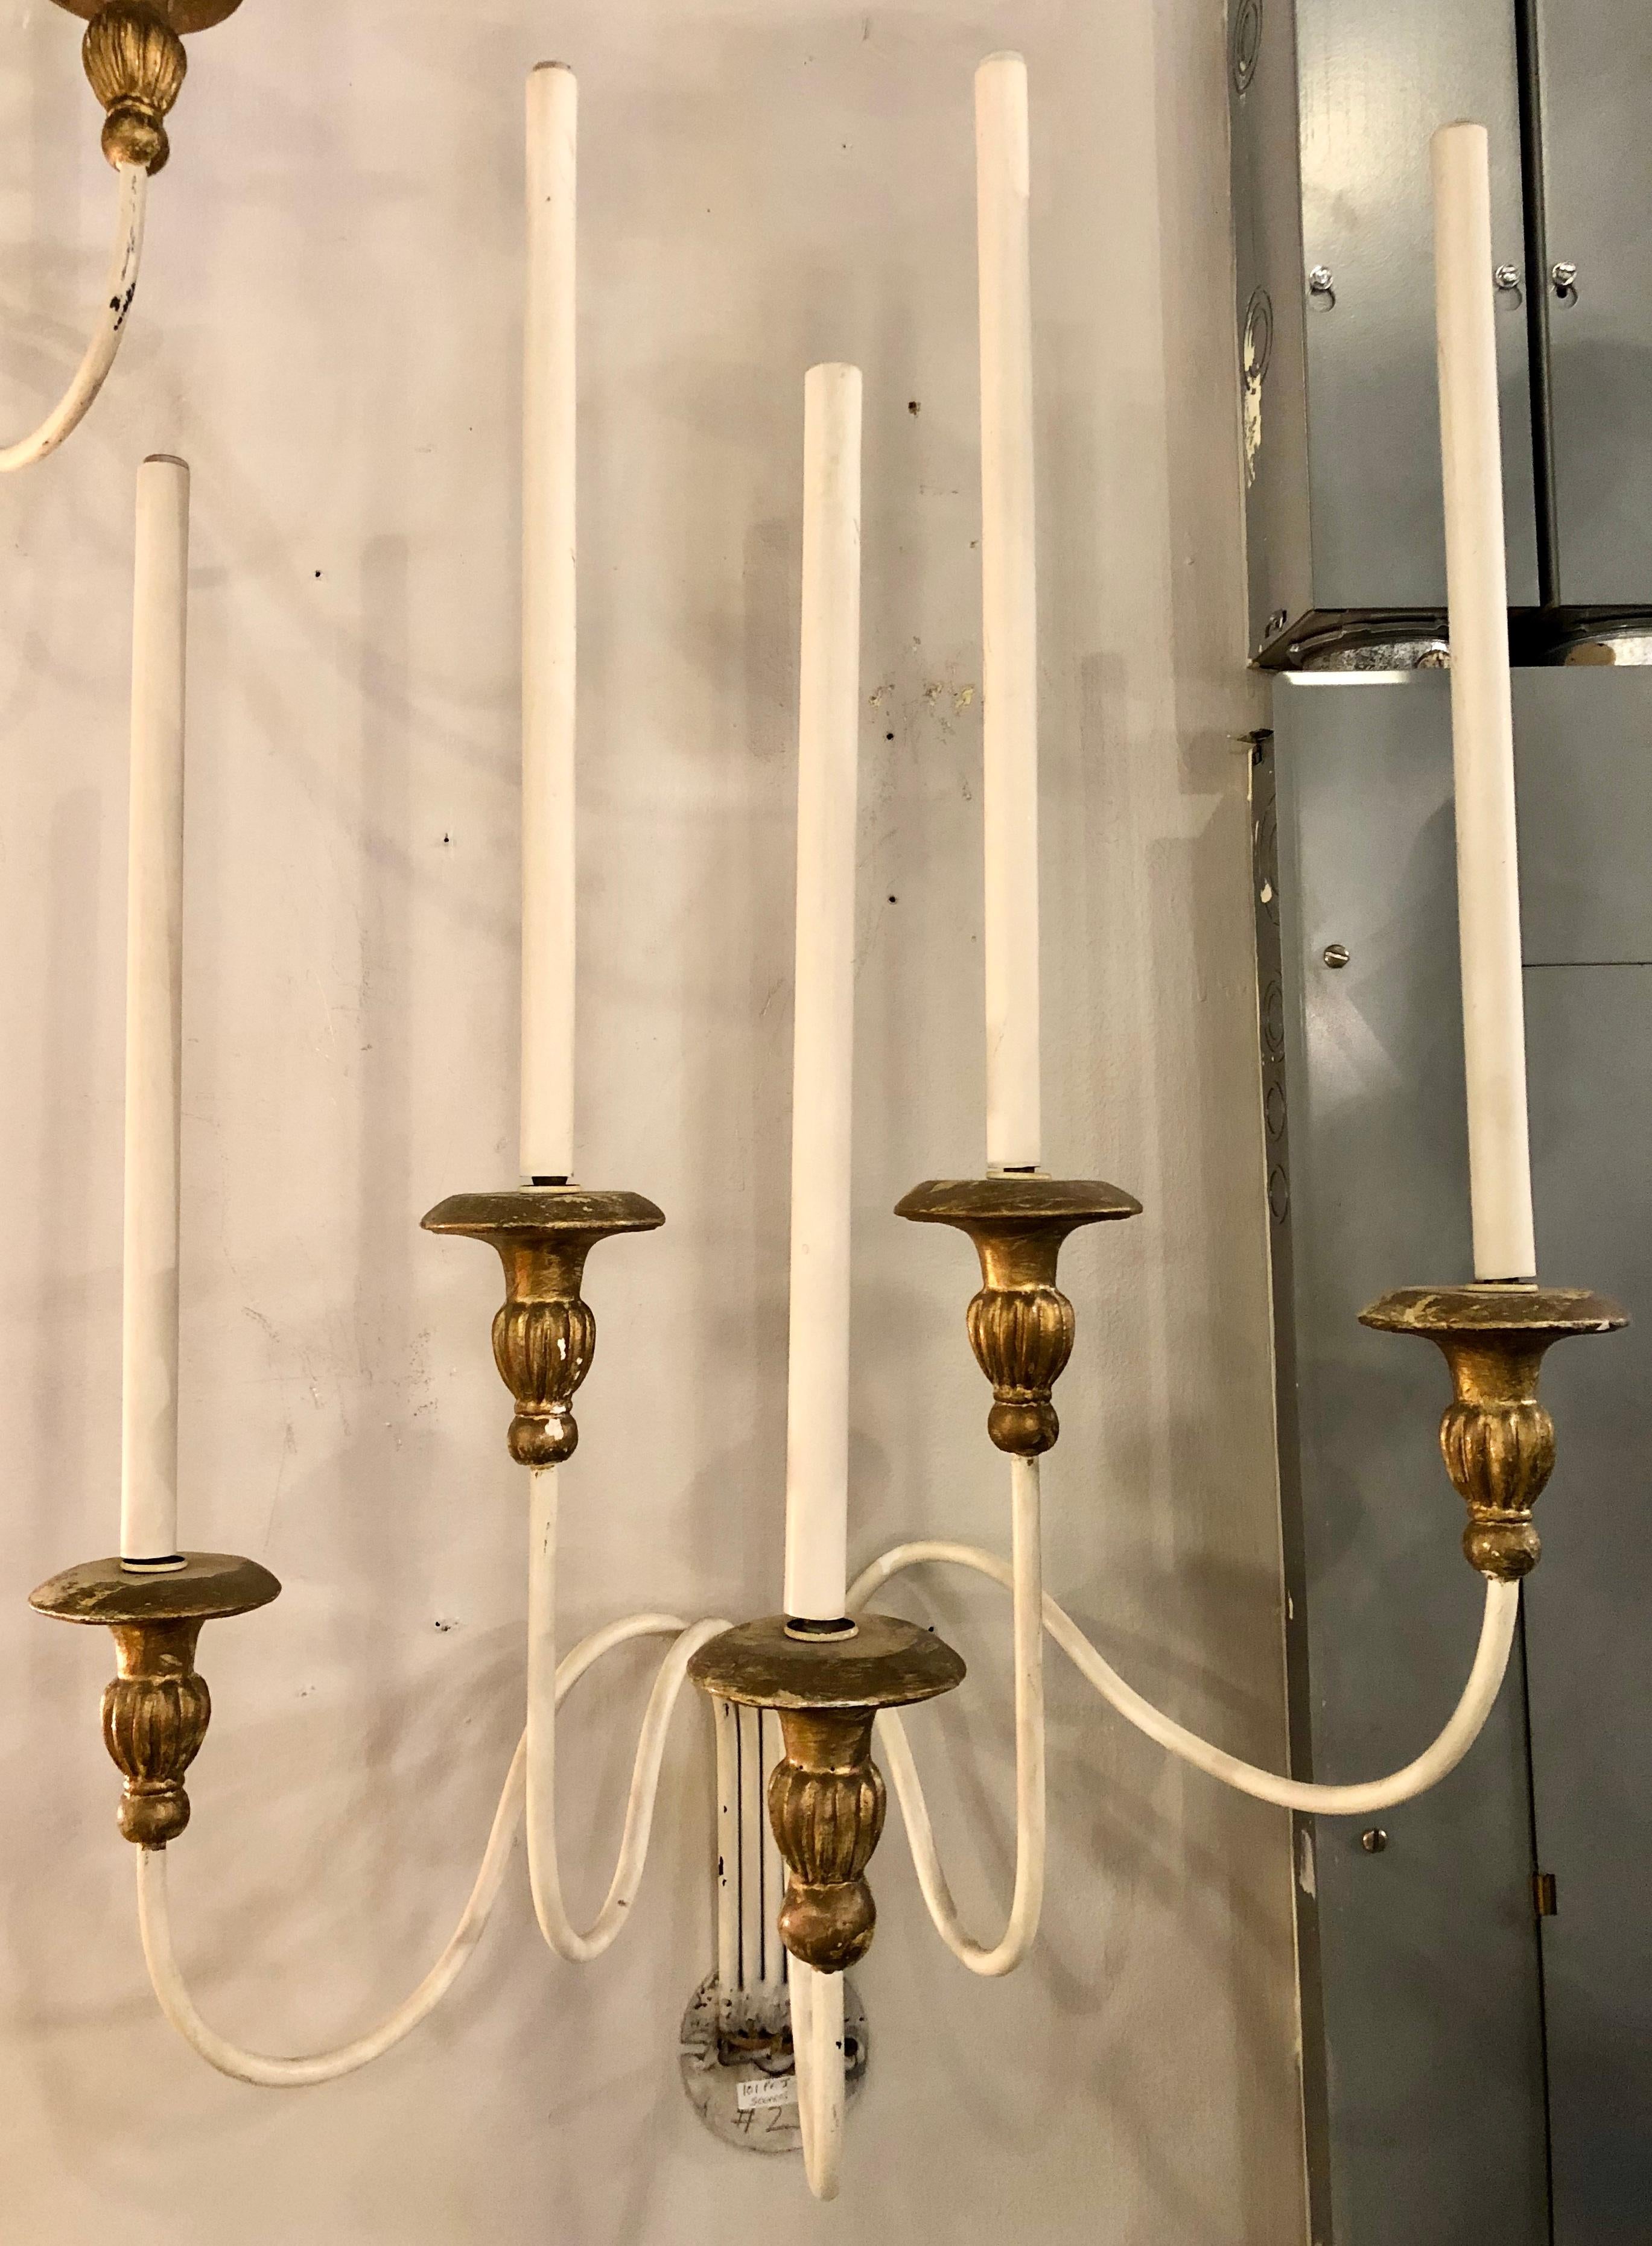 Pair of Hollywood Regency Maison Jansen wall sconces. A large and impressive pair of paint and parcel-gilt decorated wall scones. The pair having metal frames with gilt gold bobeches and large impressive flowing arms. Distressed.